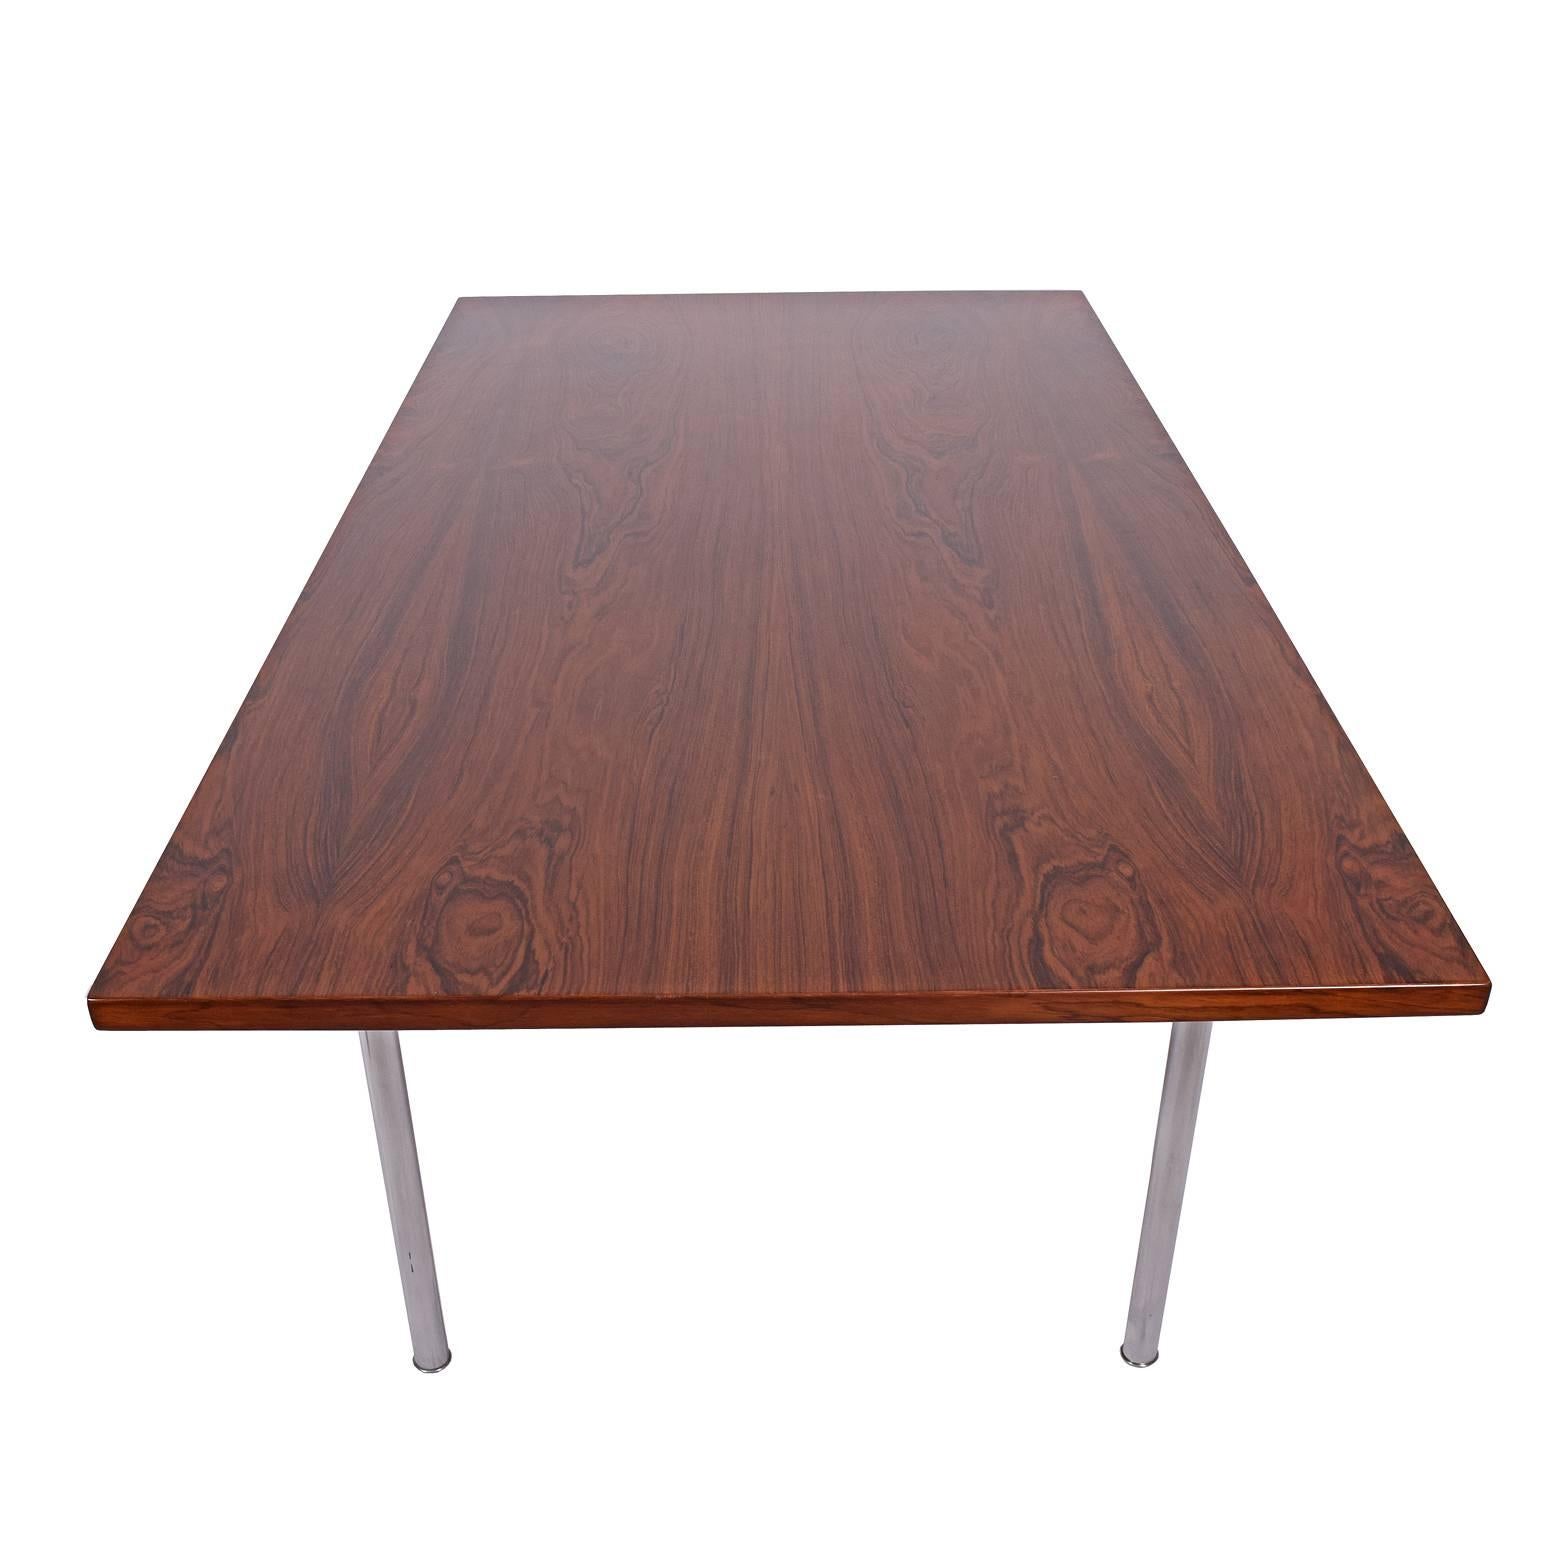 Working Dining Rosewood Table by Hans Wegner #AT-318 for Andreas Tuck In Good Condition For Sale In Hudson, NY